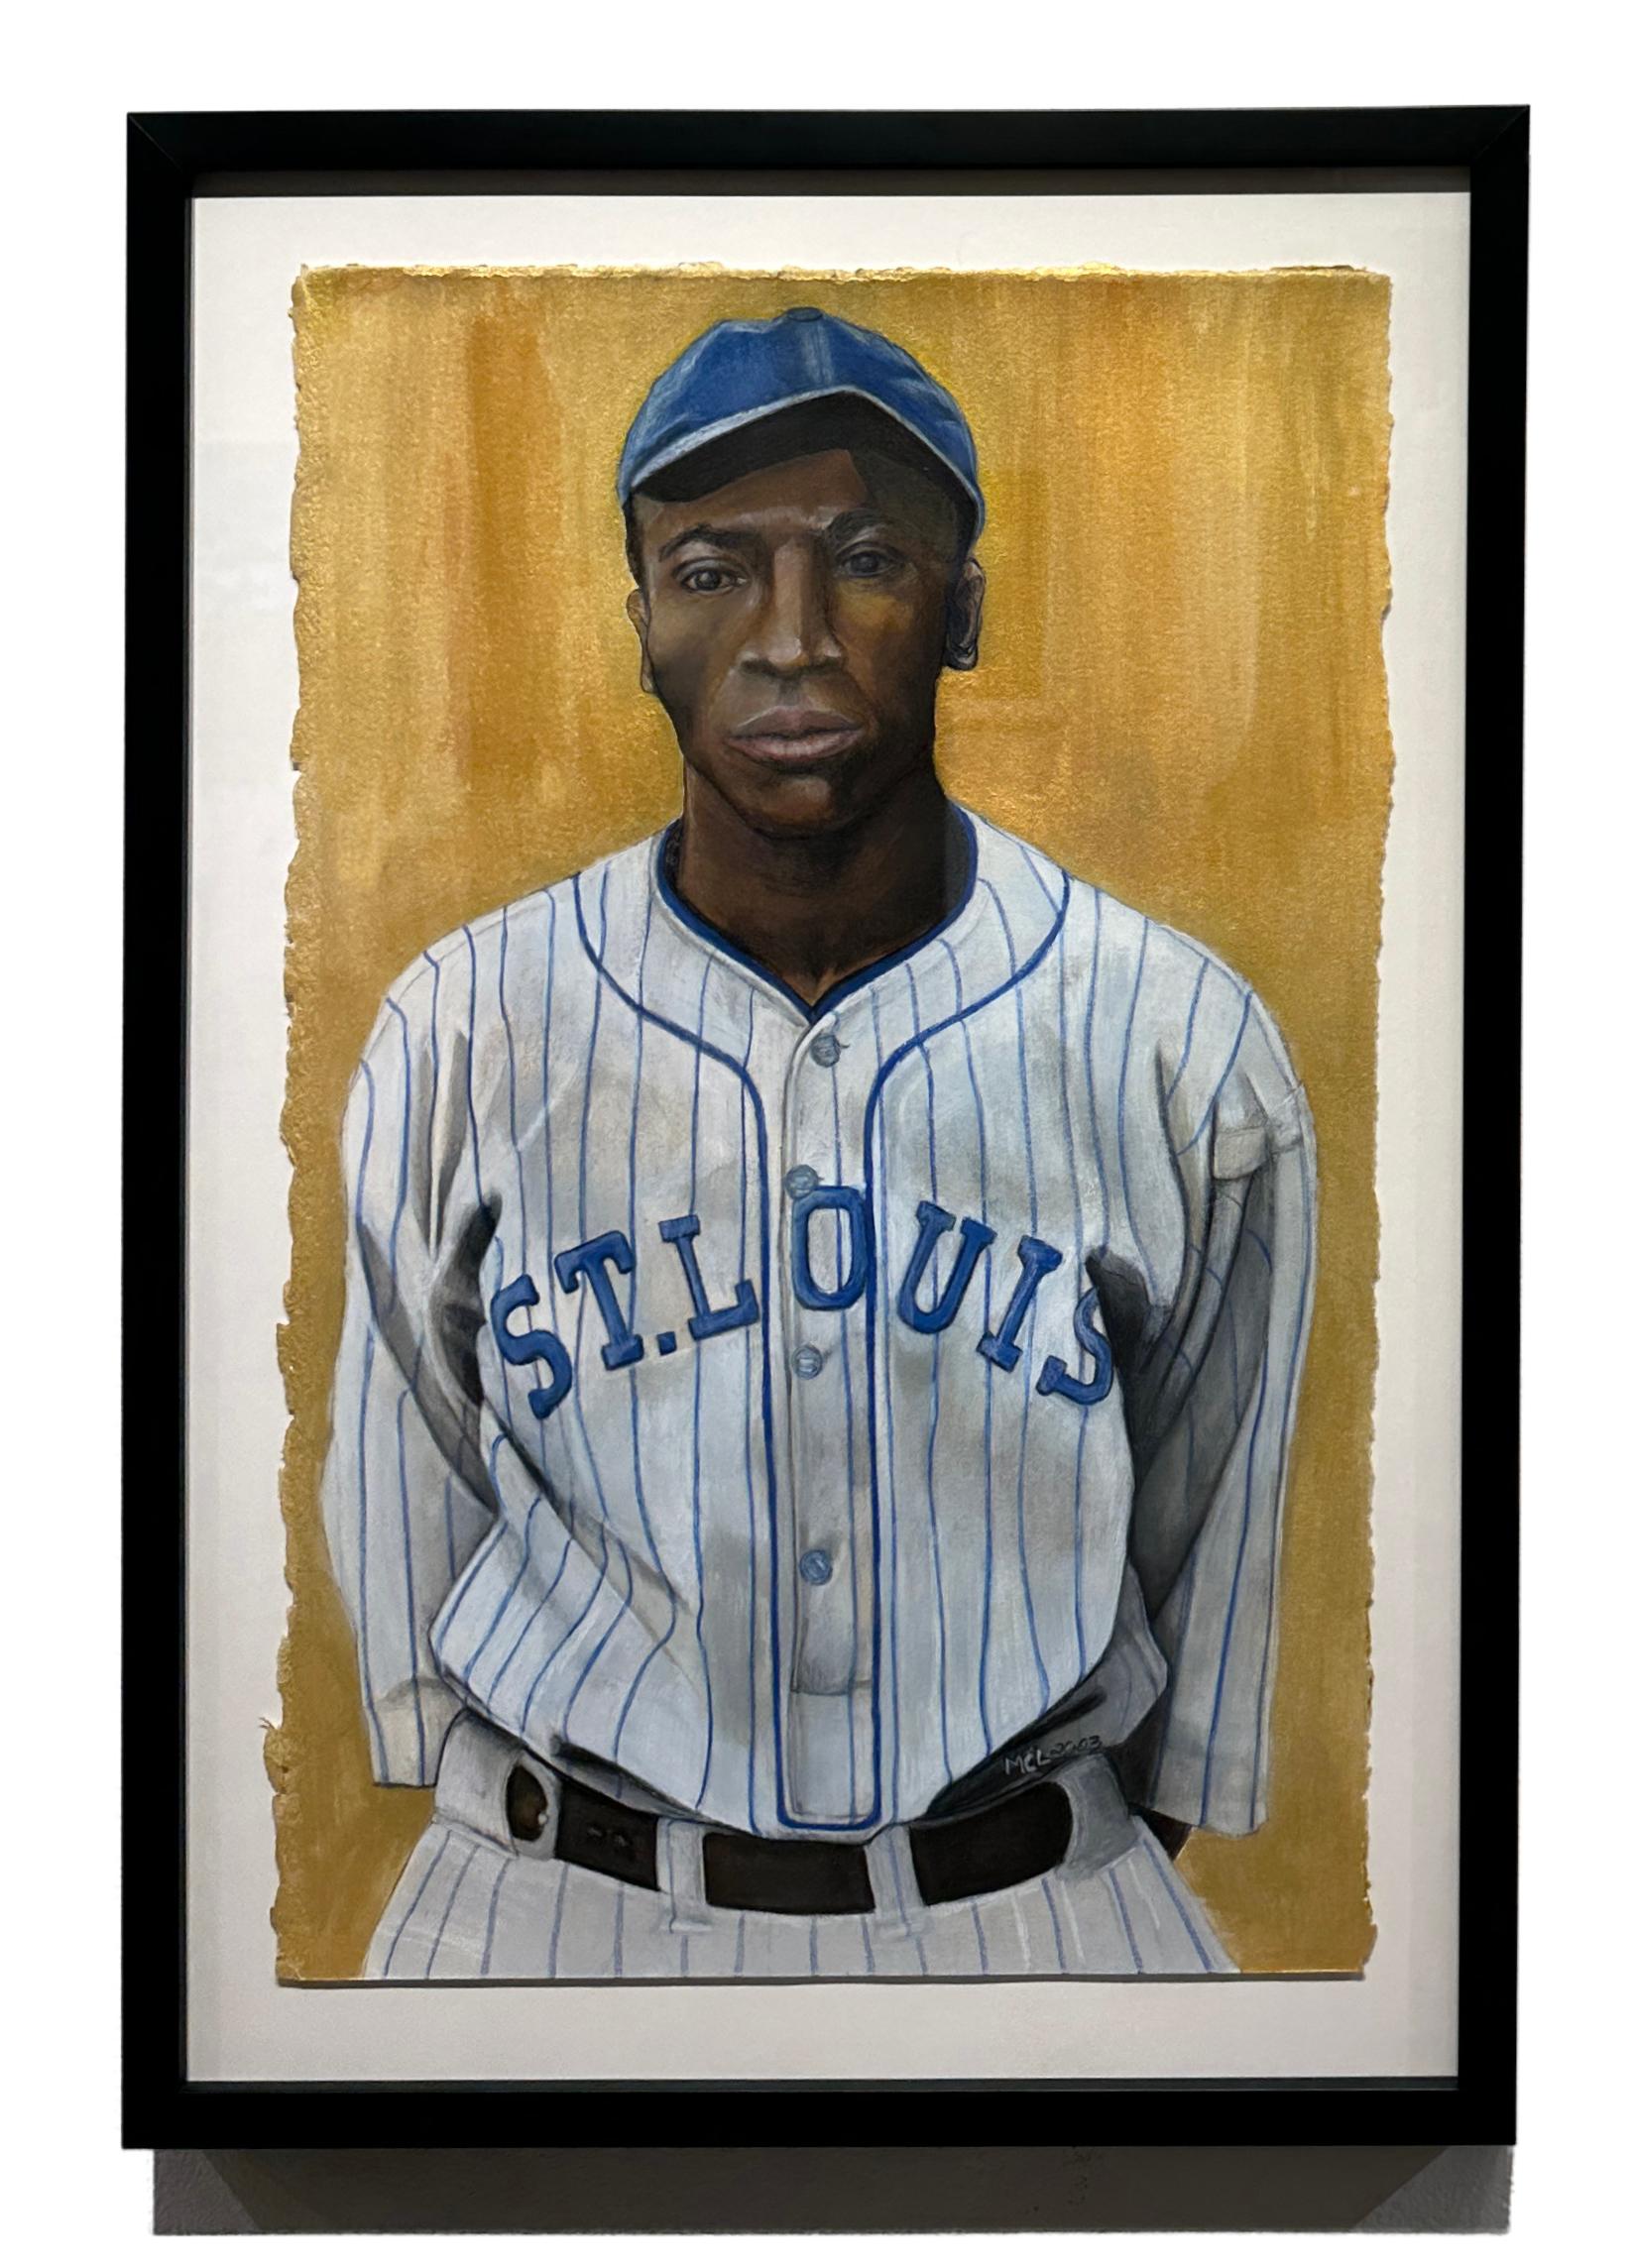 Cool Papa Bell is considered to be the fastest man ever to play professional baseball. His achievements, in the Negro Leagues and in Latin America, earned his induction into the National Baseball Hall of Fame in Cooperstown, New York, in 1974.  This